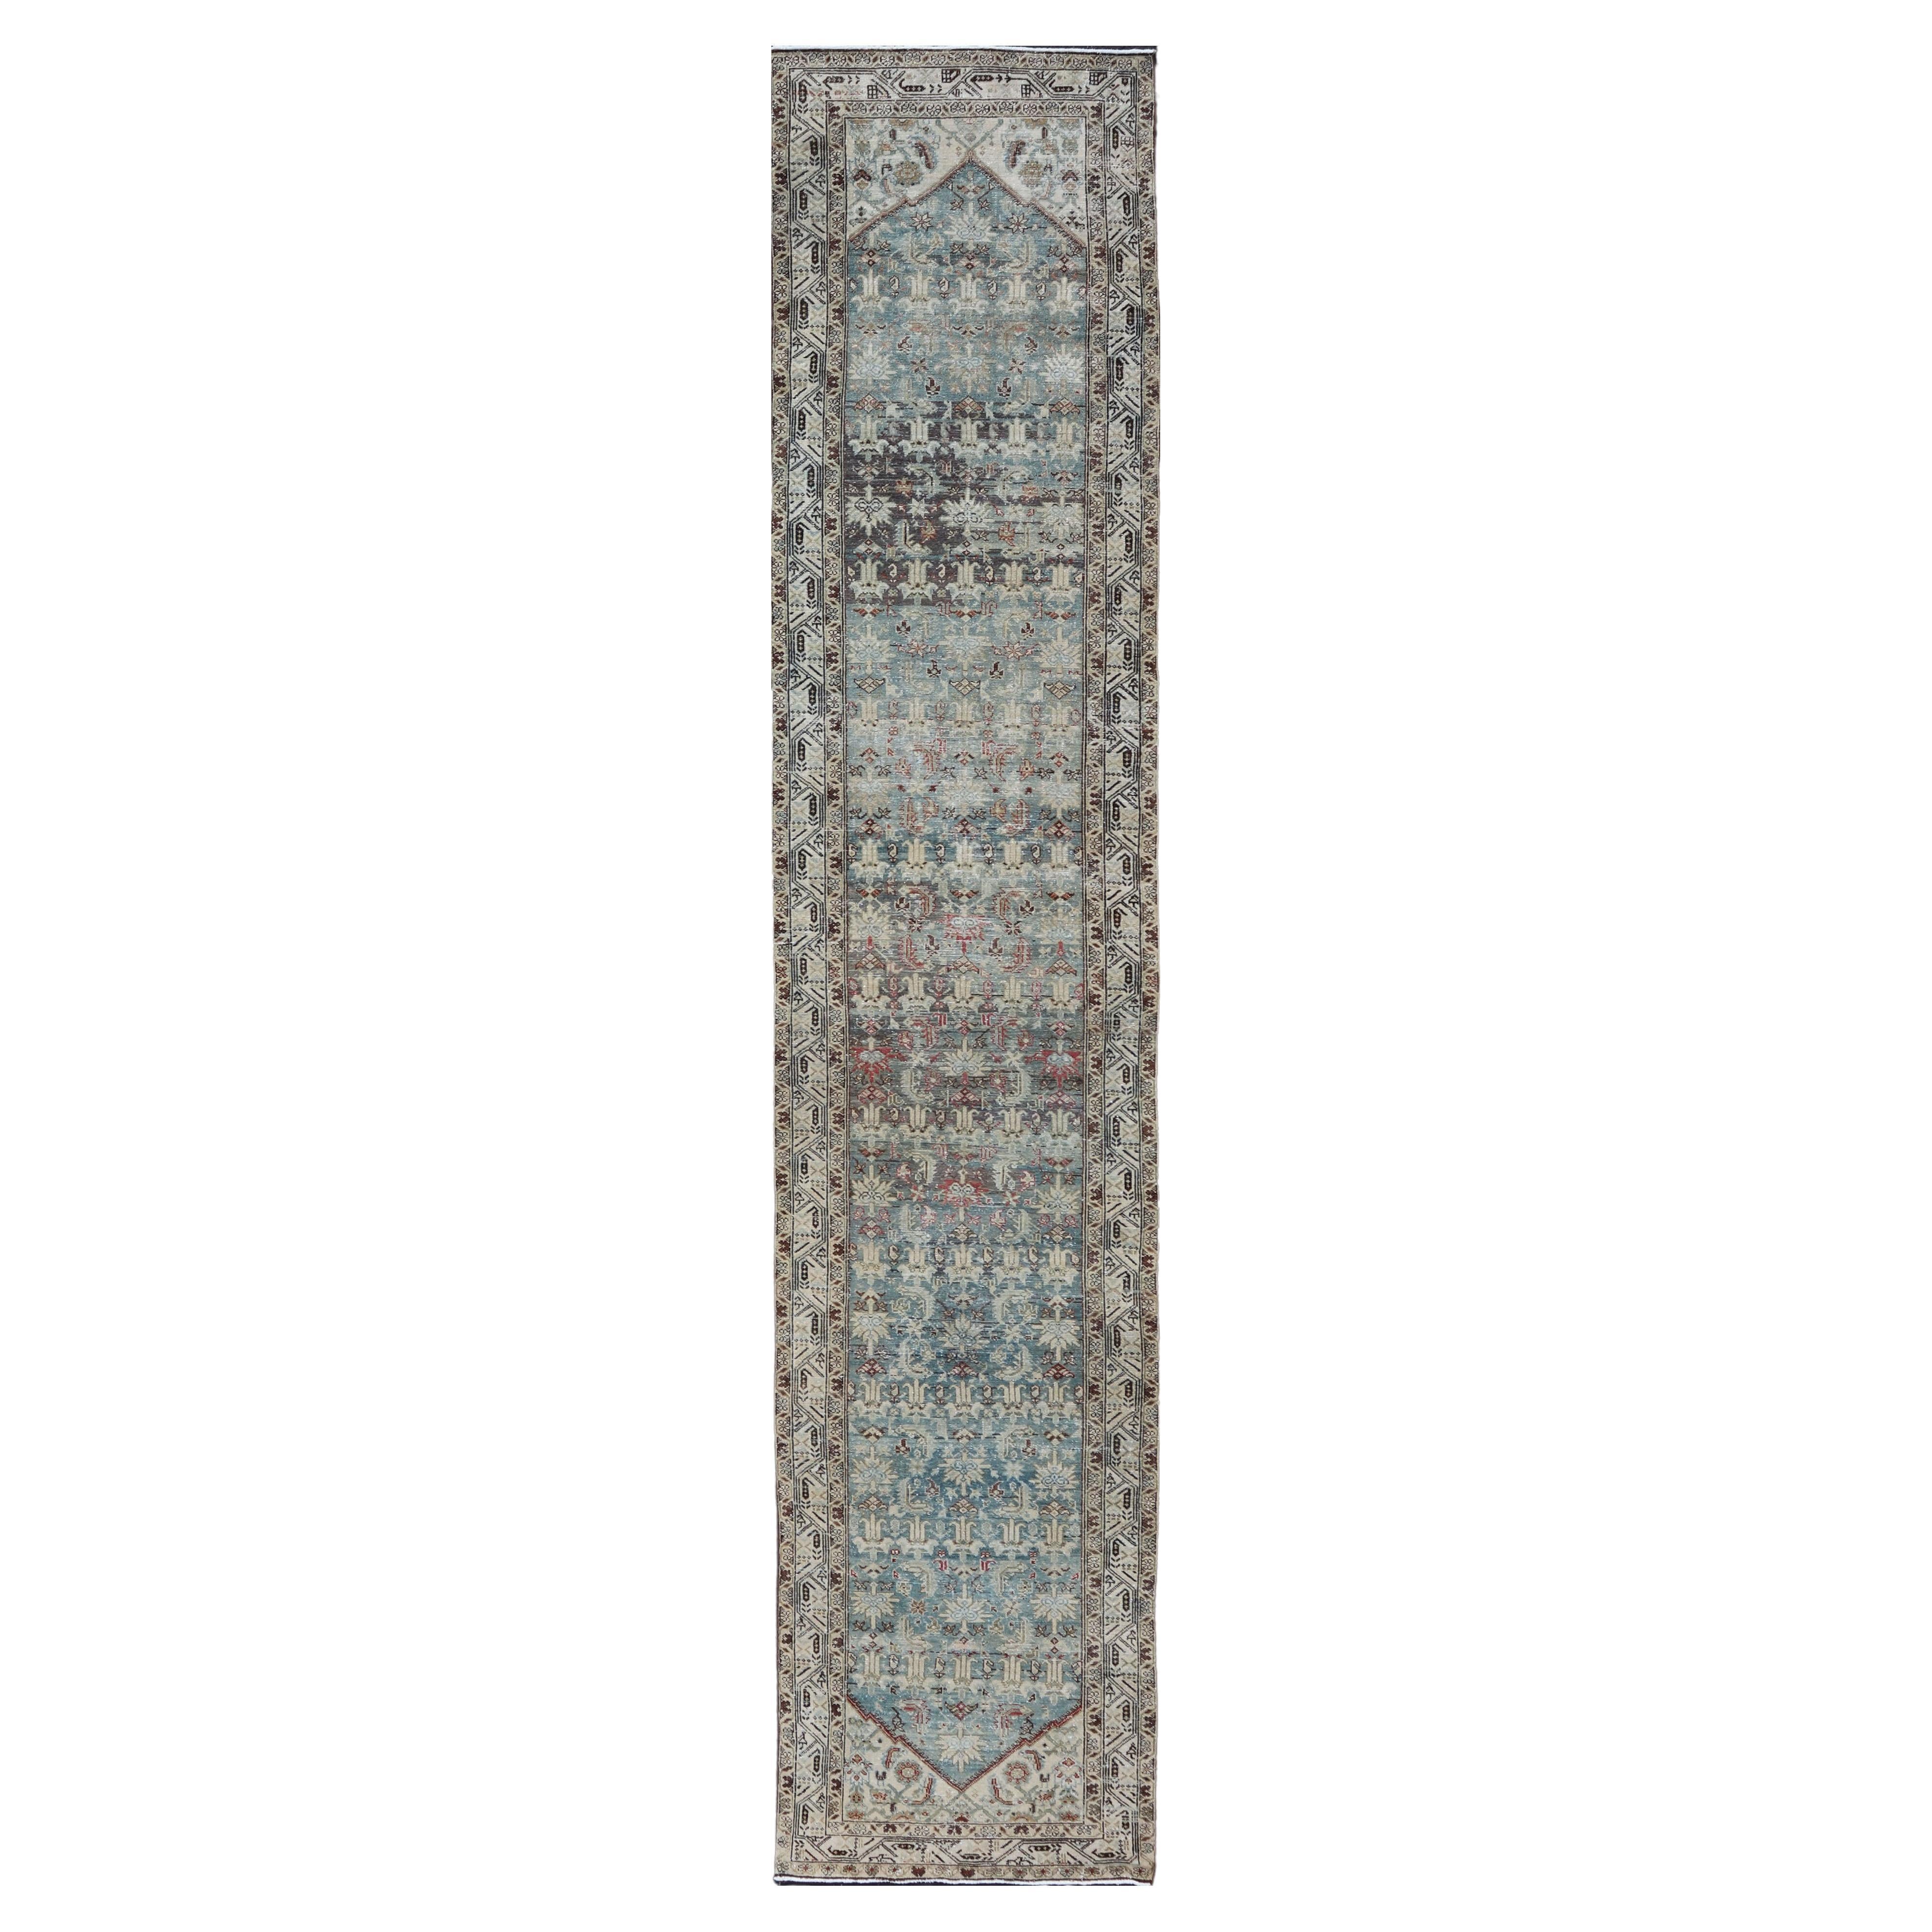 Long Antique Persian Hamedan Runner with Sub-Geometric Design With Red & Blue's